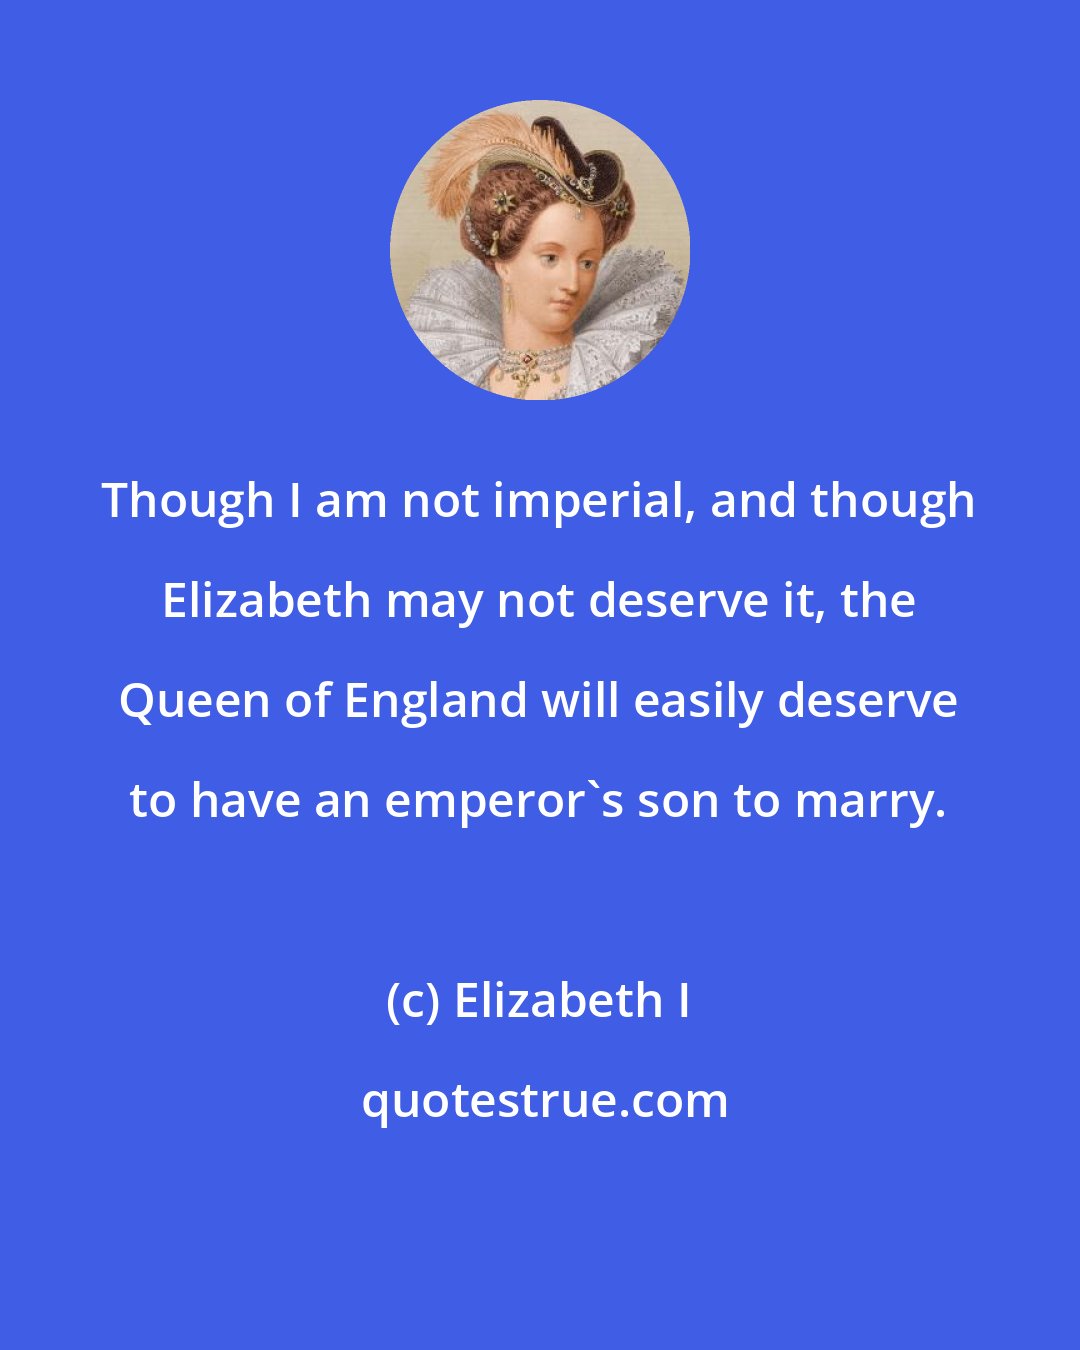 Elizabeth I: Though I am not imperial, and though Elizabeth may not deserve it, the Queen of England will easily deserve to have an emperor's son to marry.